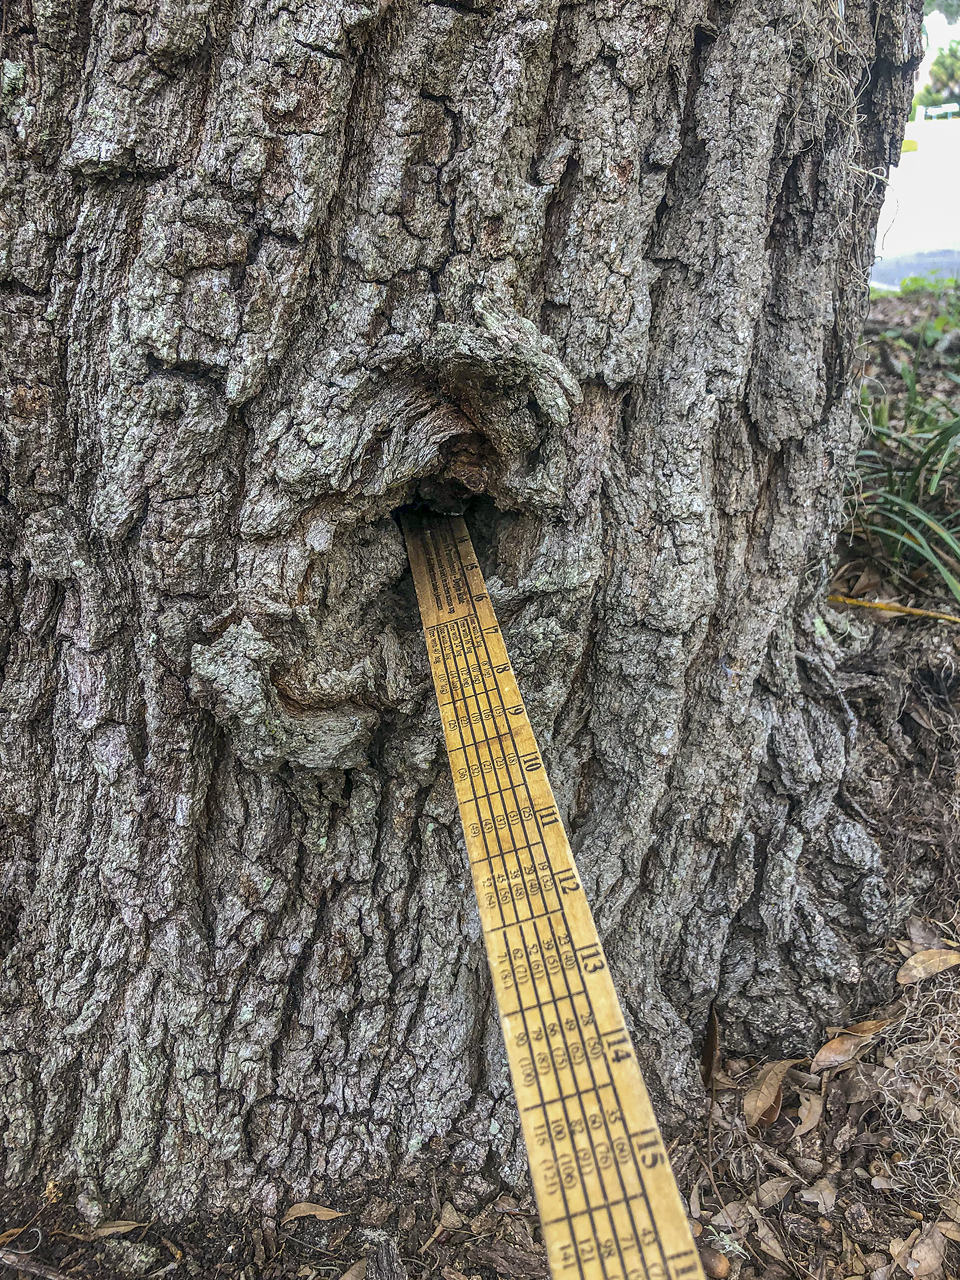 This is a small cavity in the middle of the trunk. It is wise to keep an eye on this to ensure the cavity is not getting larger or deeper within the tree, but at this point it is not a major concern.